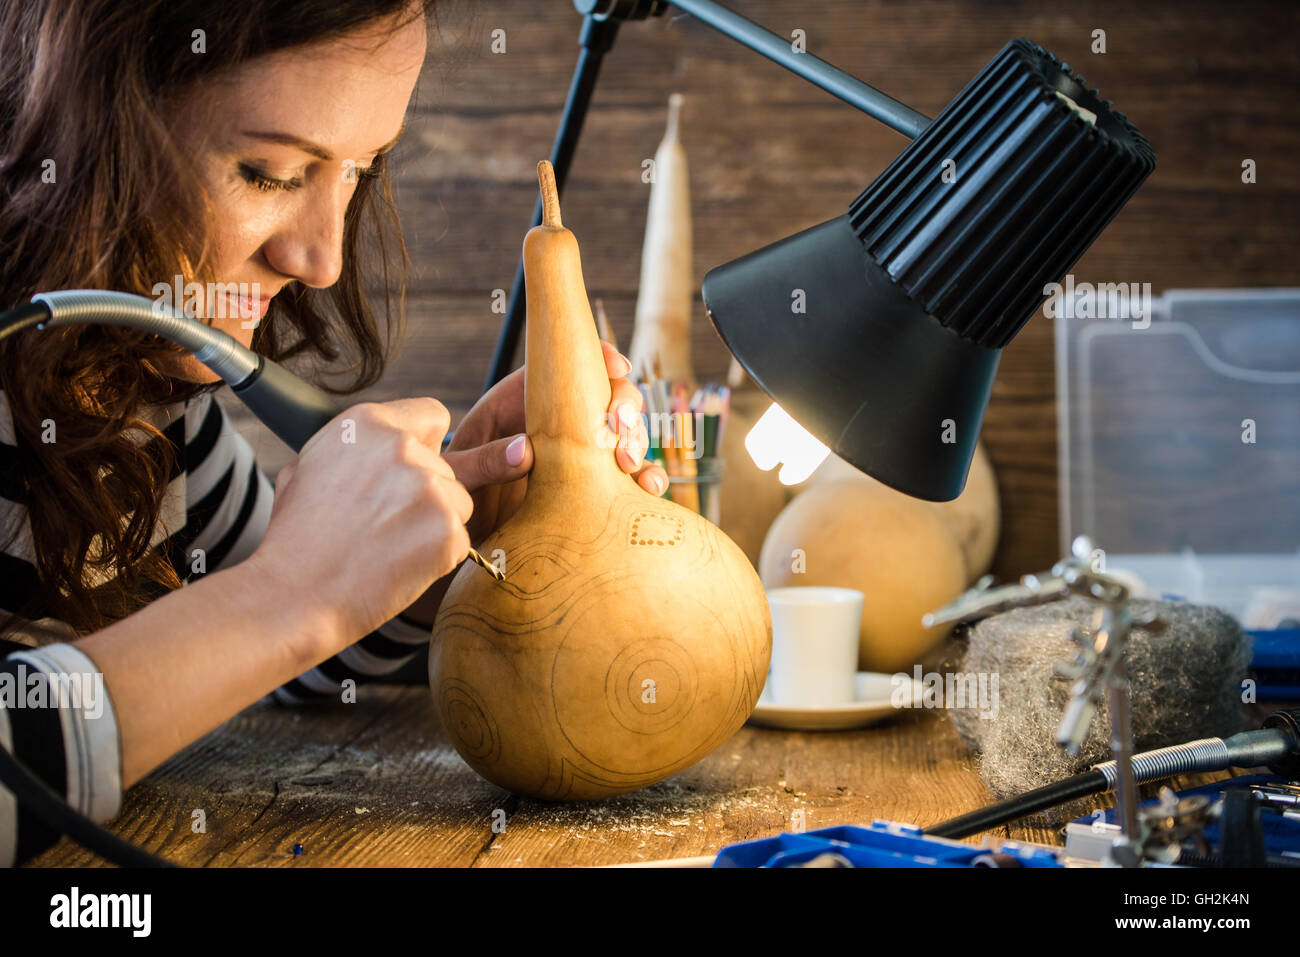 young woman skilled artisan in workshop working with hand tools Stock Photo